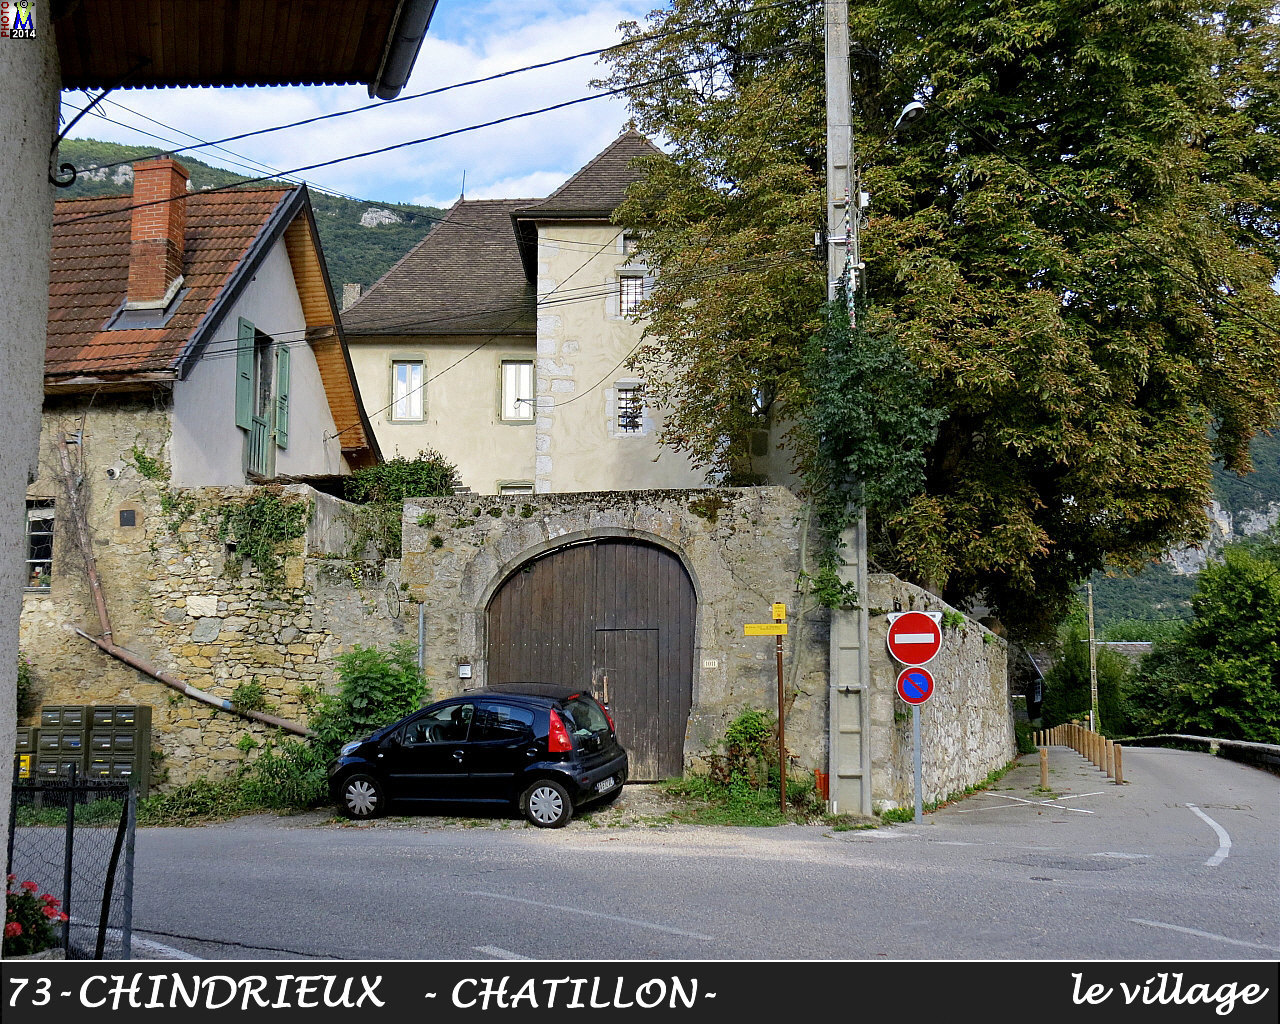 73CHINDRIEUXzCHATILLON_village_100.jpg